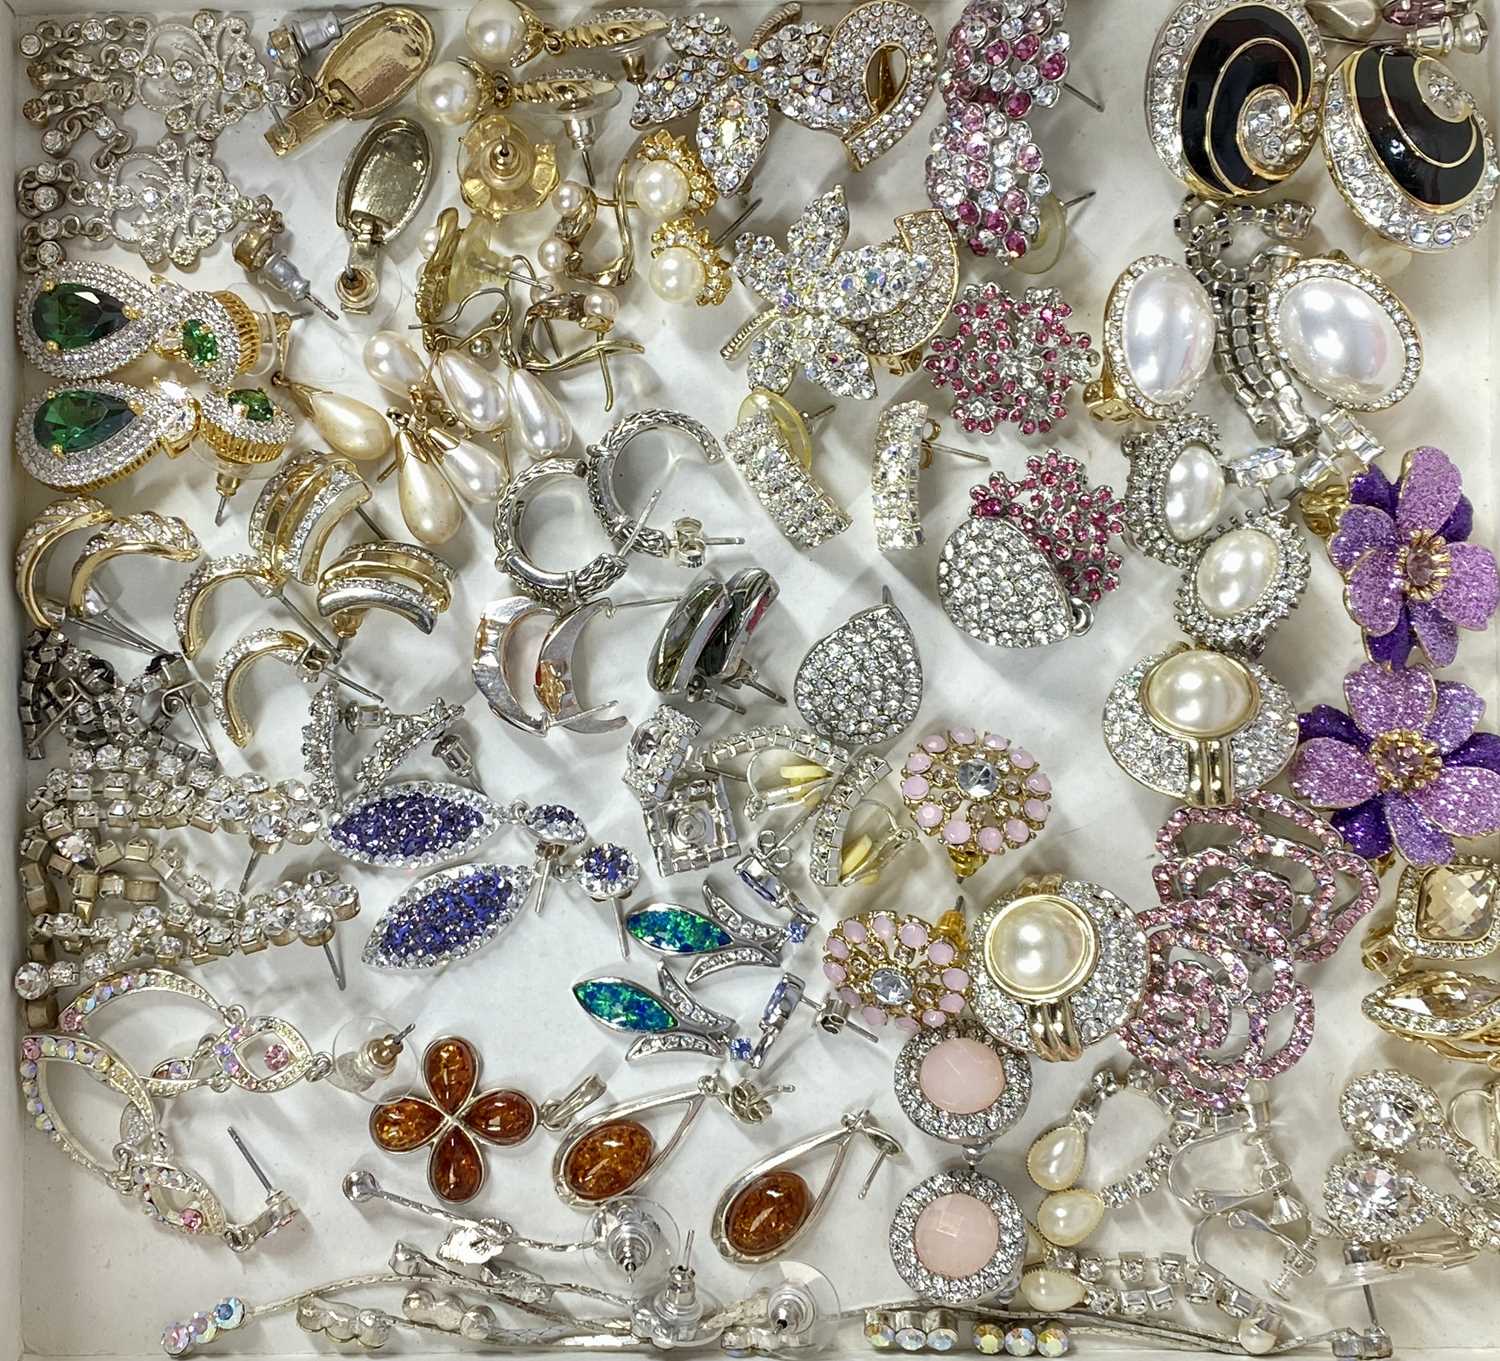 GOOD QUALITY COSTUME JEWELLERY to include approximately 50 pairs of earrings, numerous simulated - Image 4 of 7